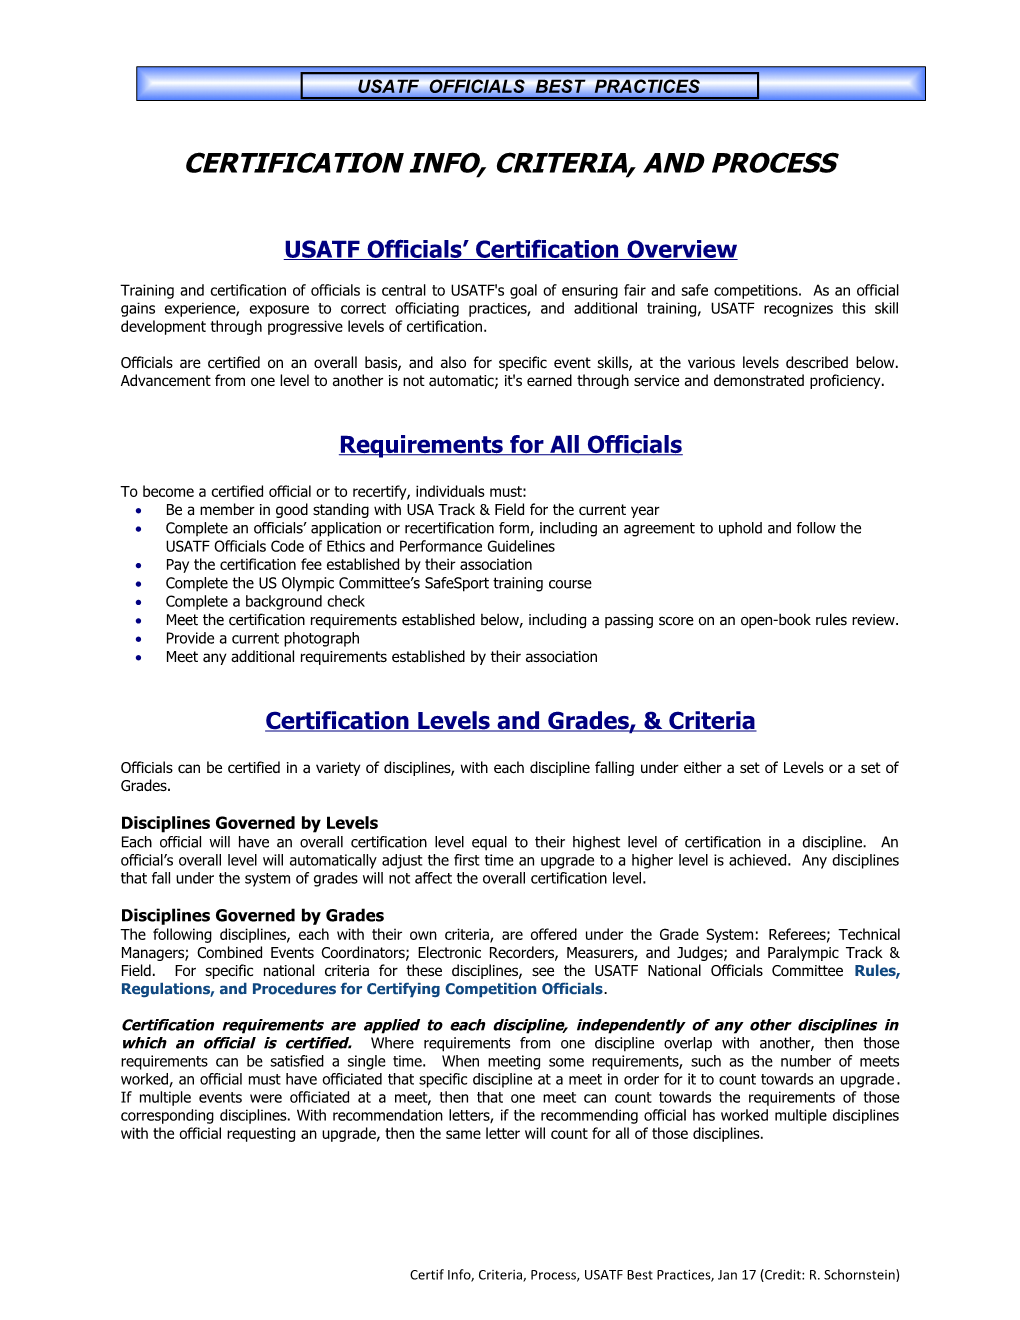 Certification Info, Criteria, and Process s1